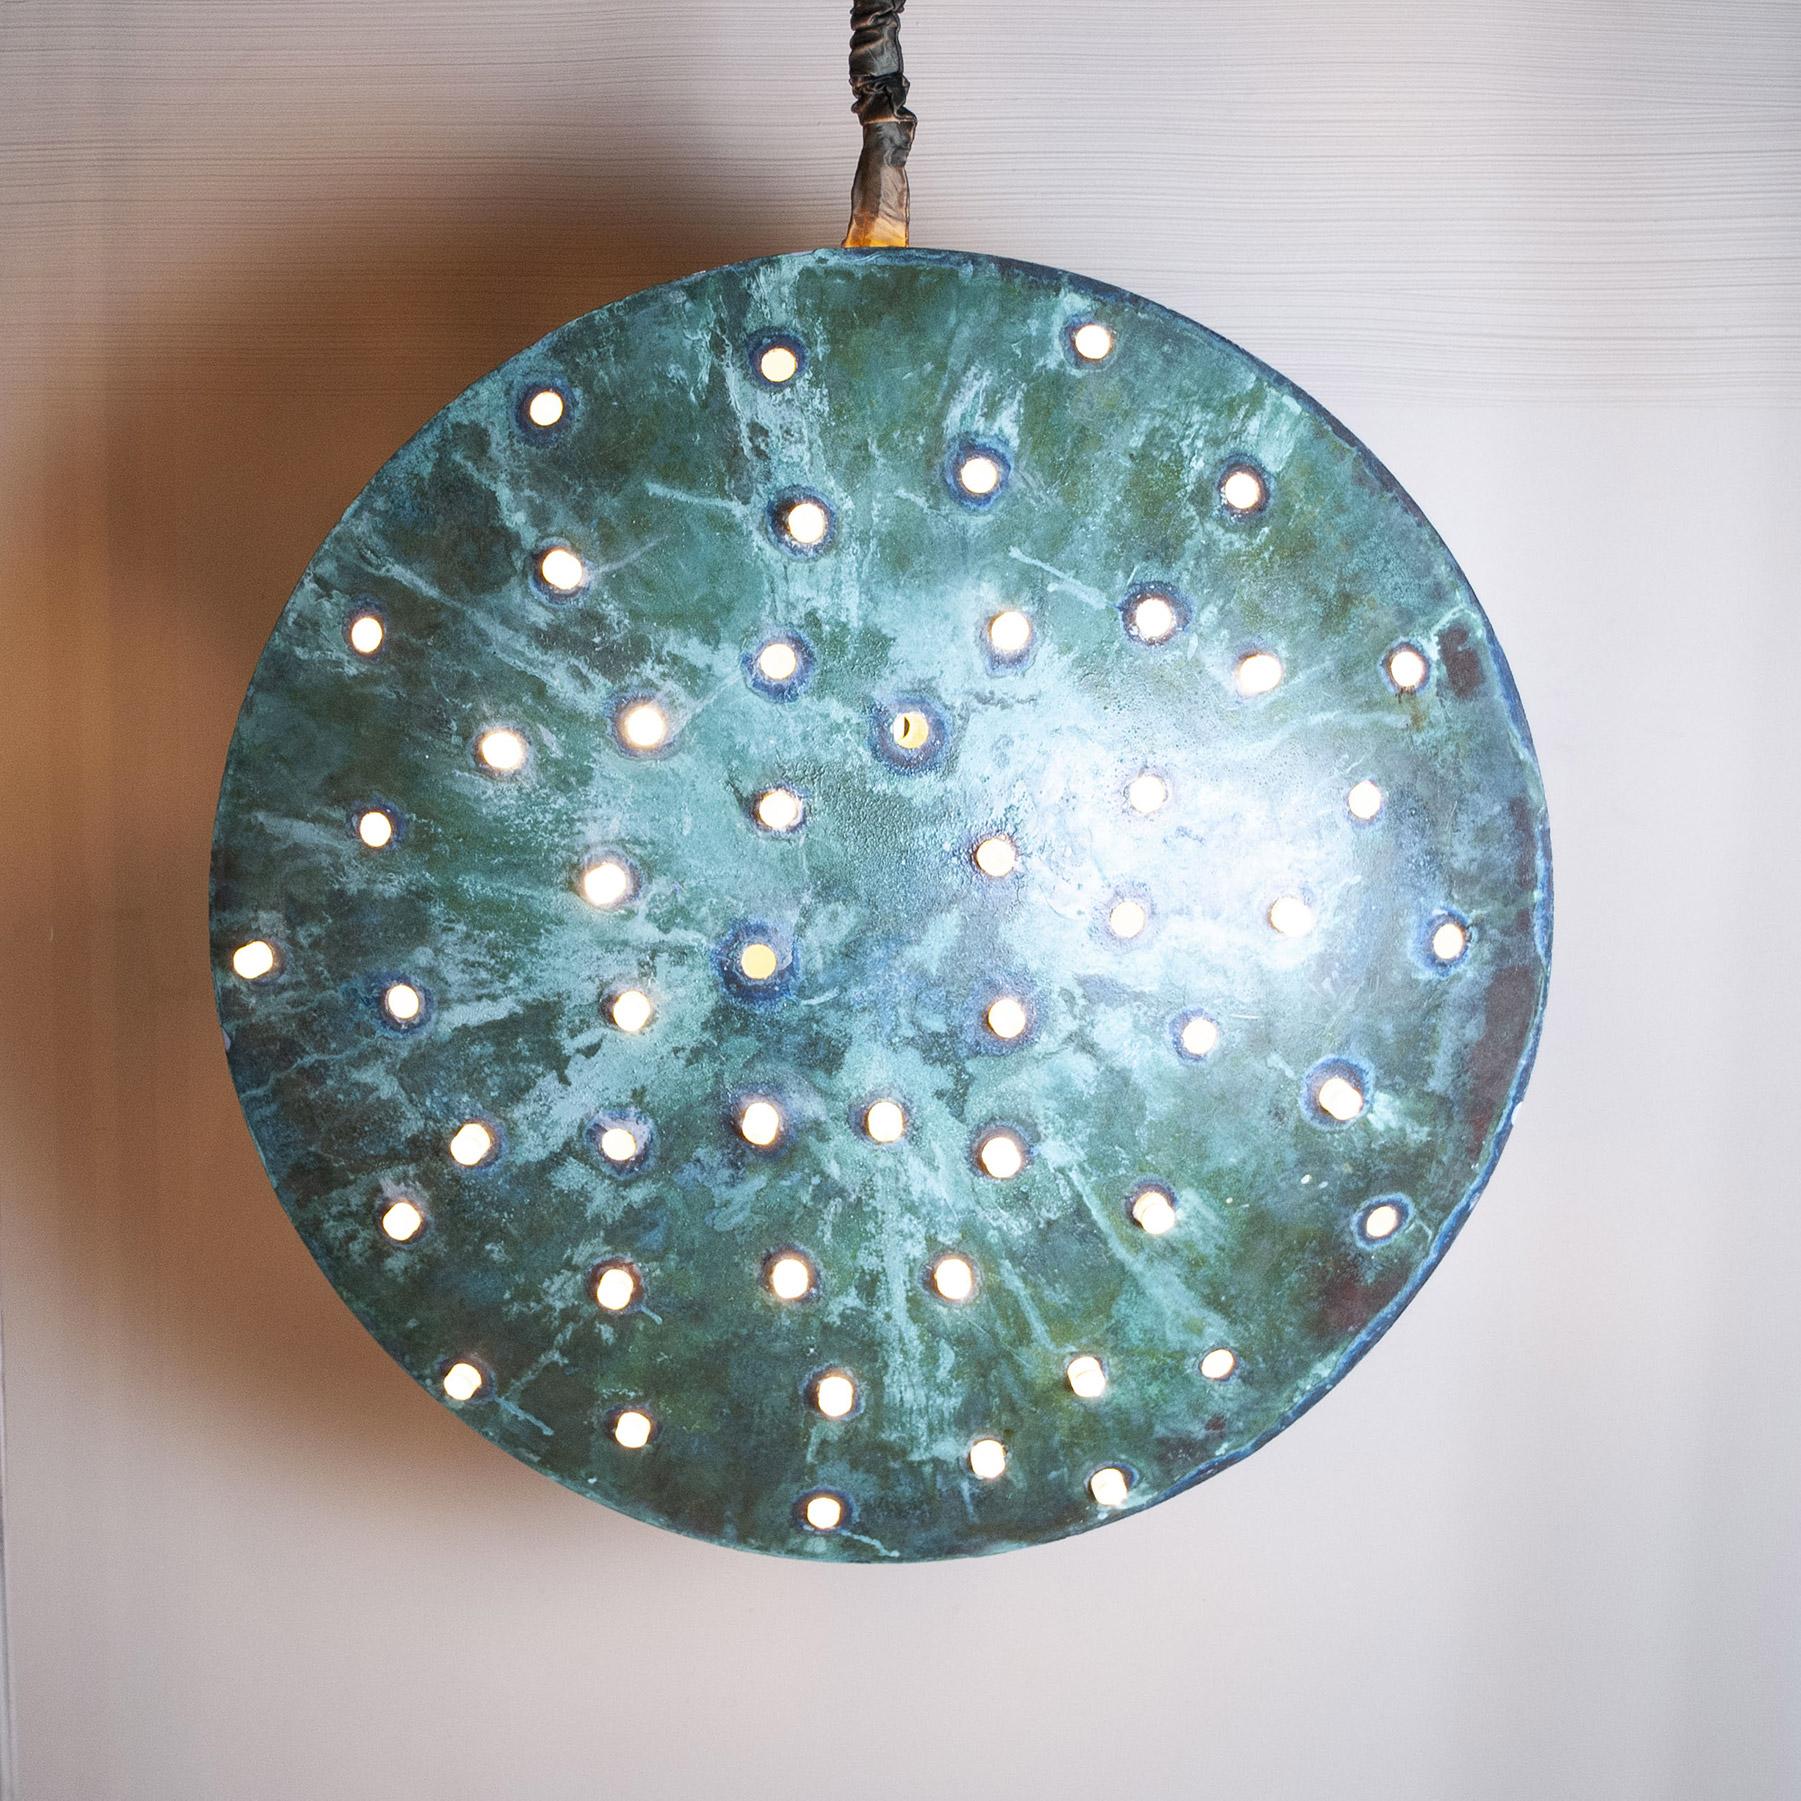 Gong Sculptural Chandelier by Cellule Creative Studio For Sale 6